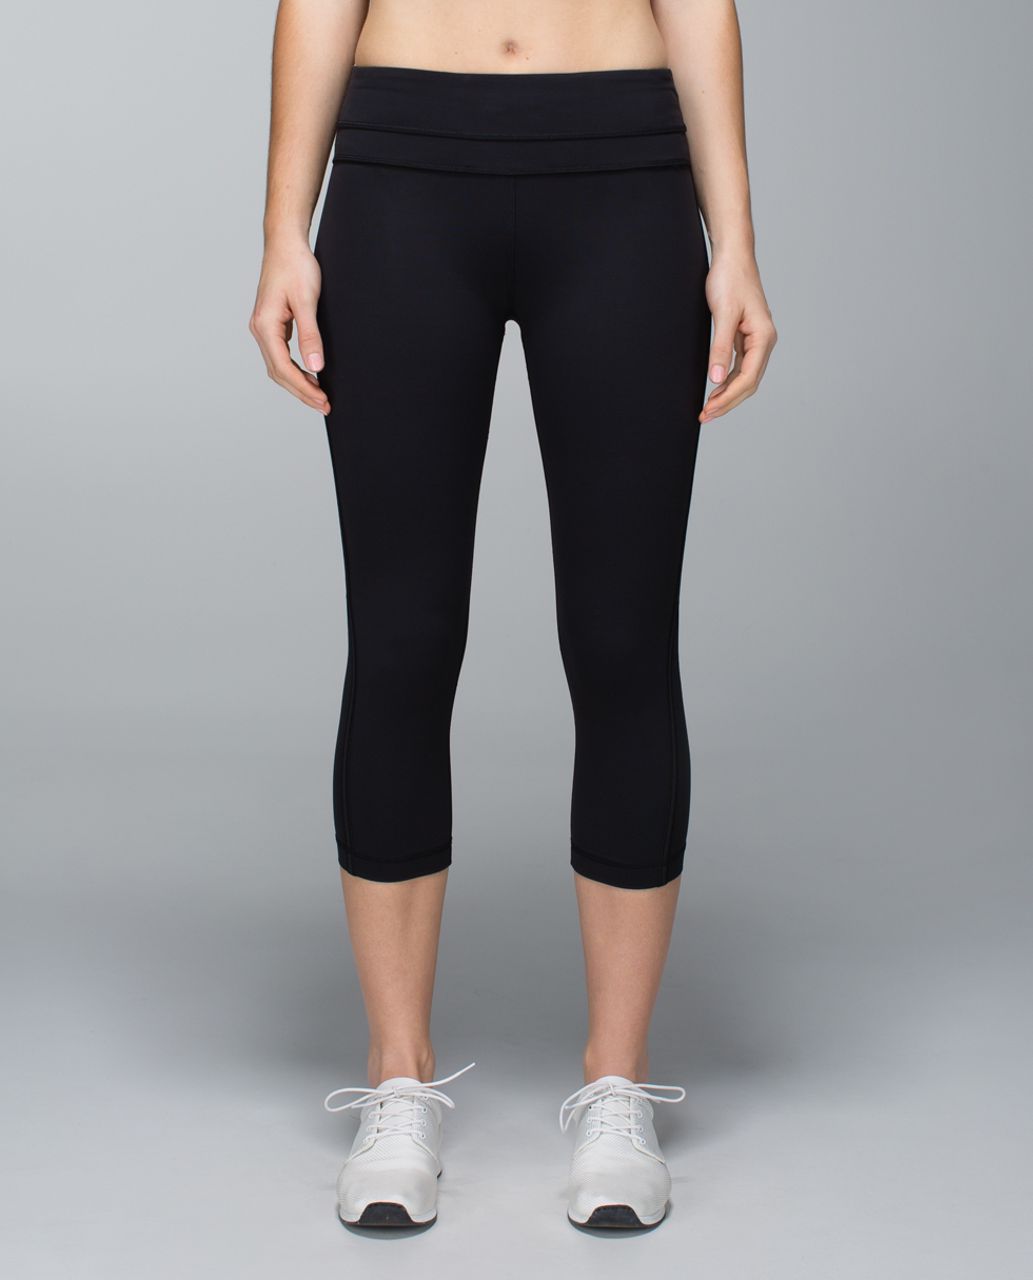 It's not far-fetched at all': Lululemon looks to add peas to yoga pants